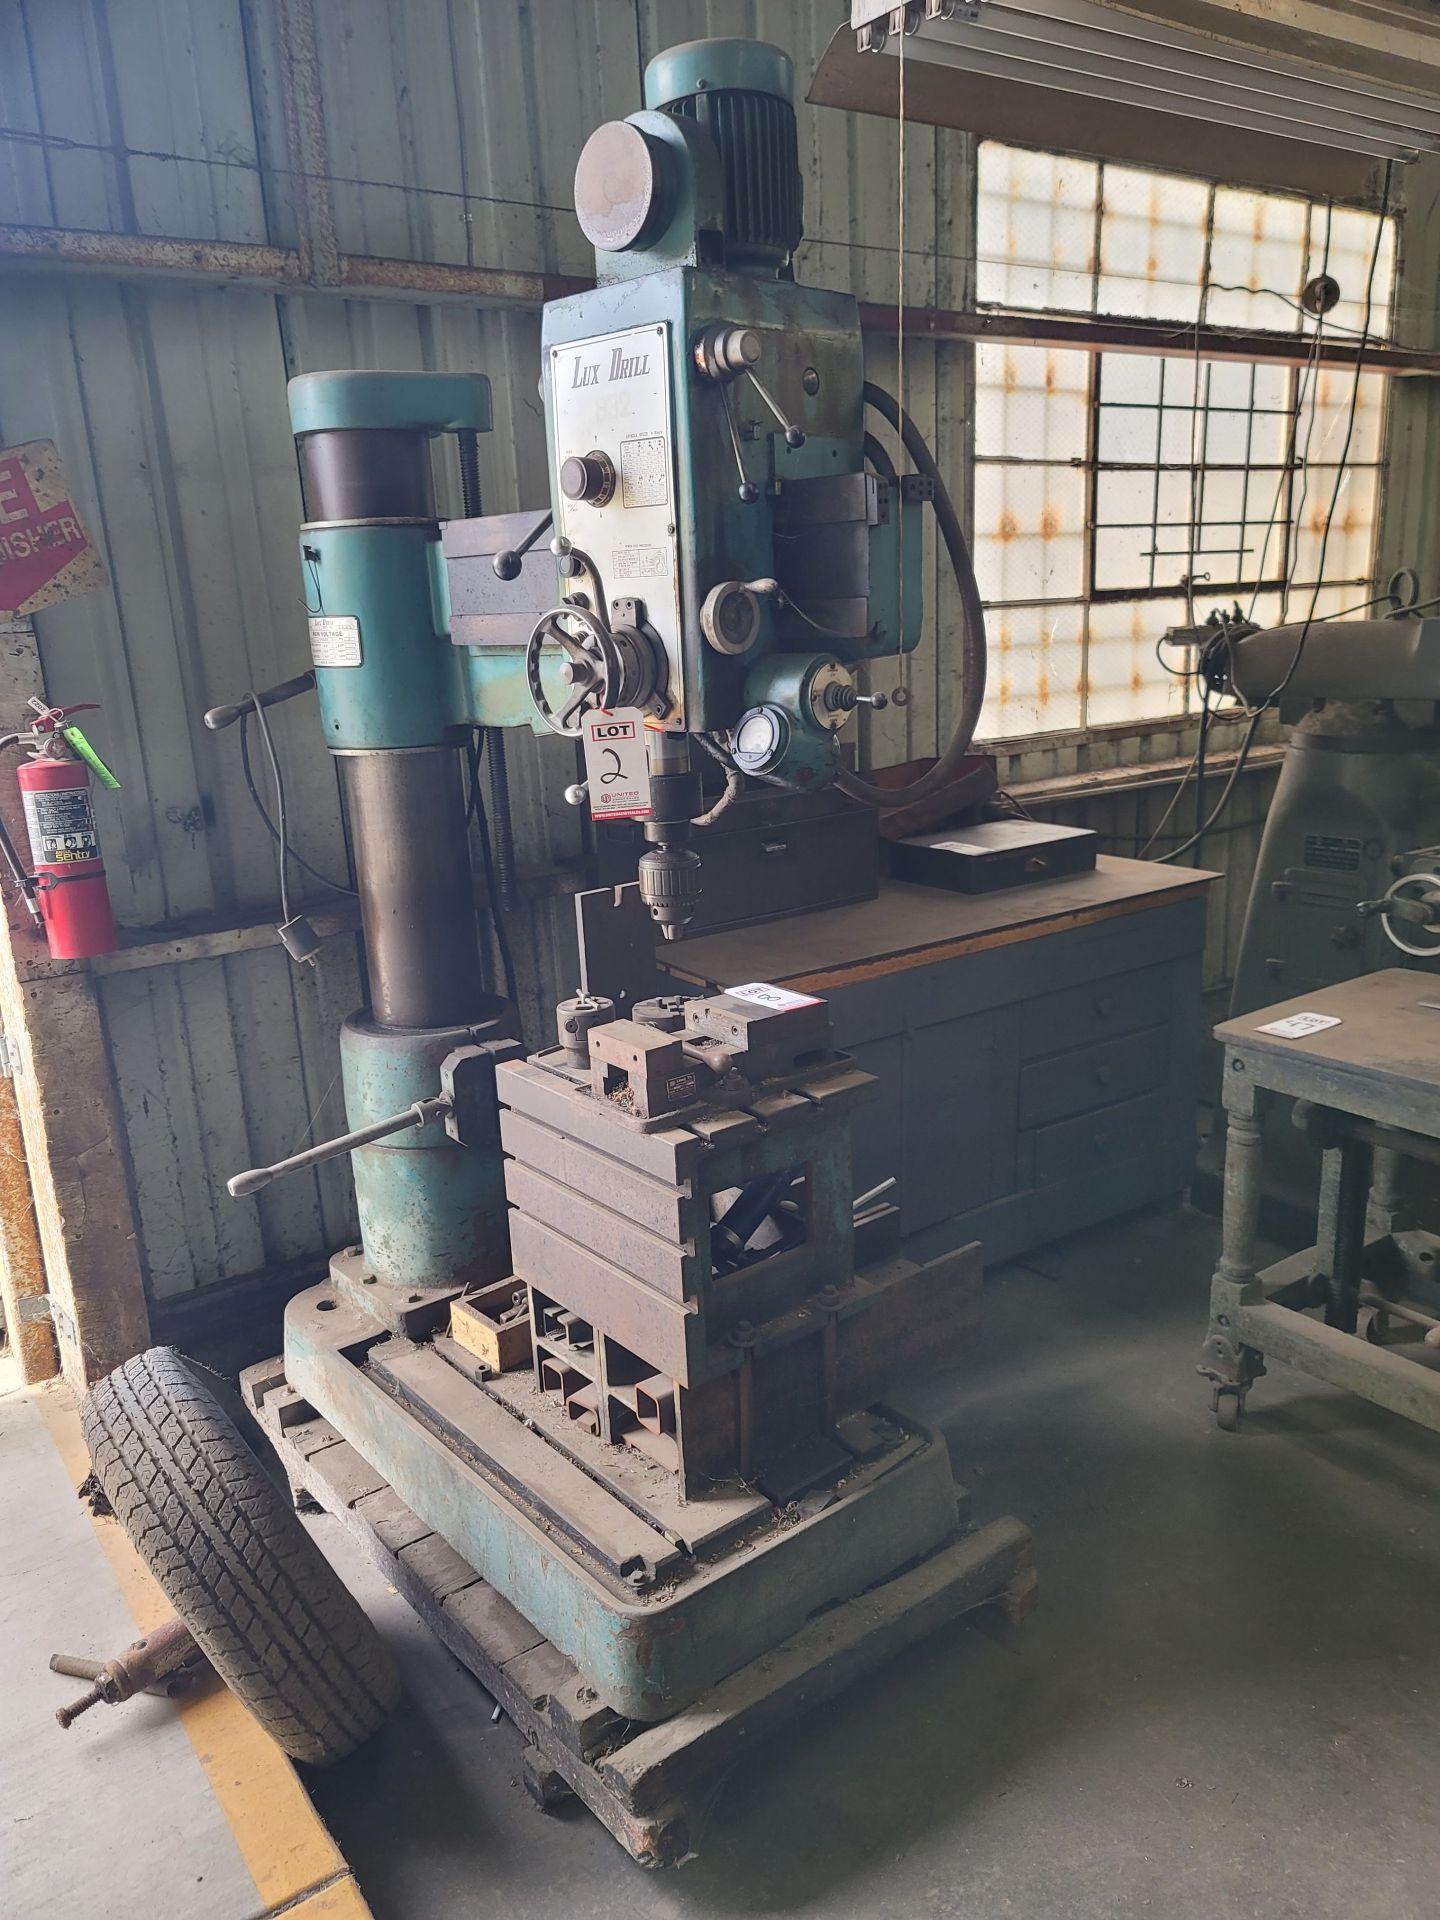 LUX DRILL RADIAL ARM DRILL, MODEL 832, S/N 7765, W/ T-SLOT ANGLE BLOCK